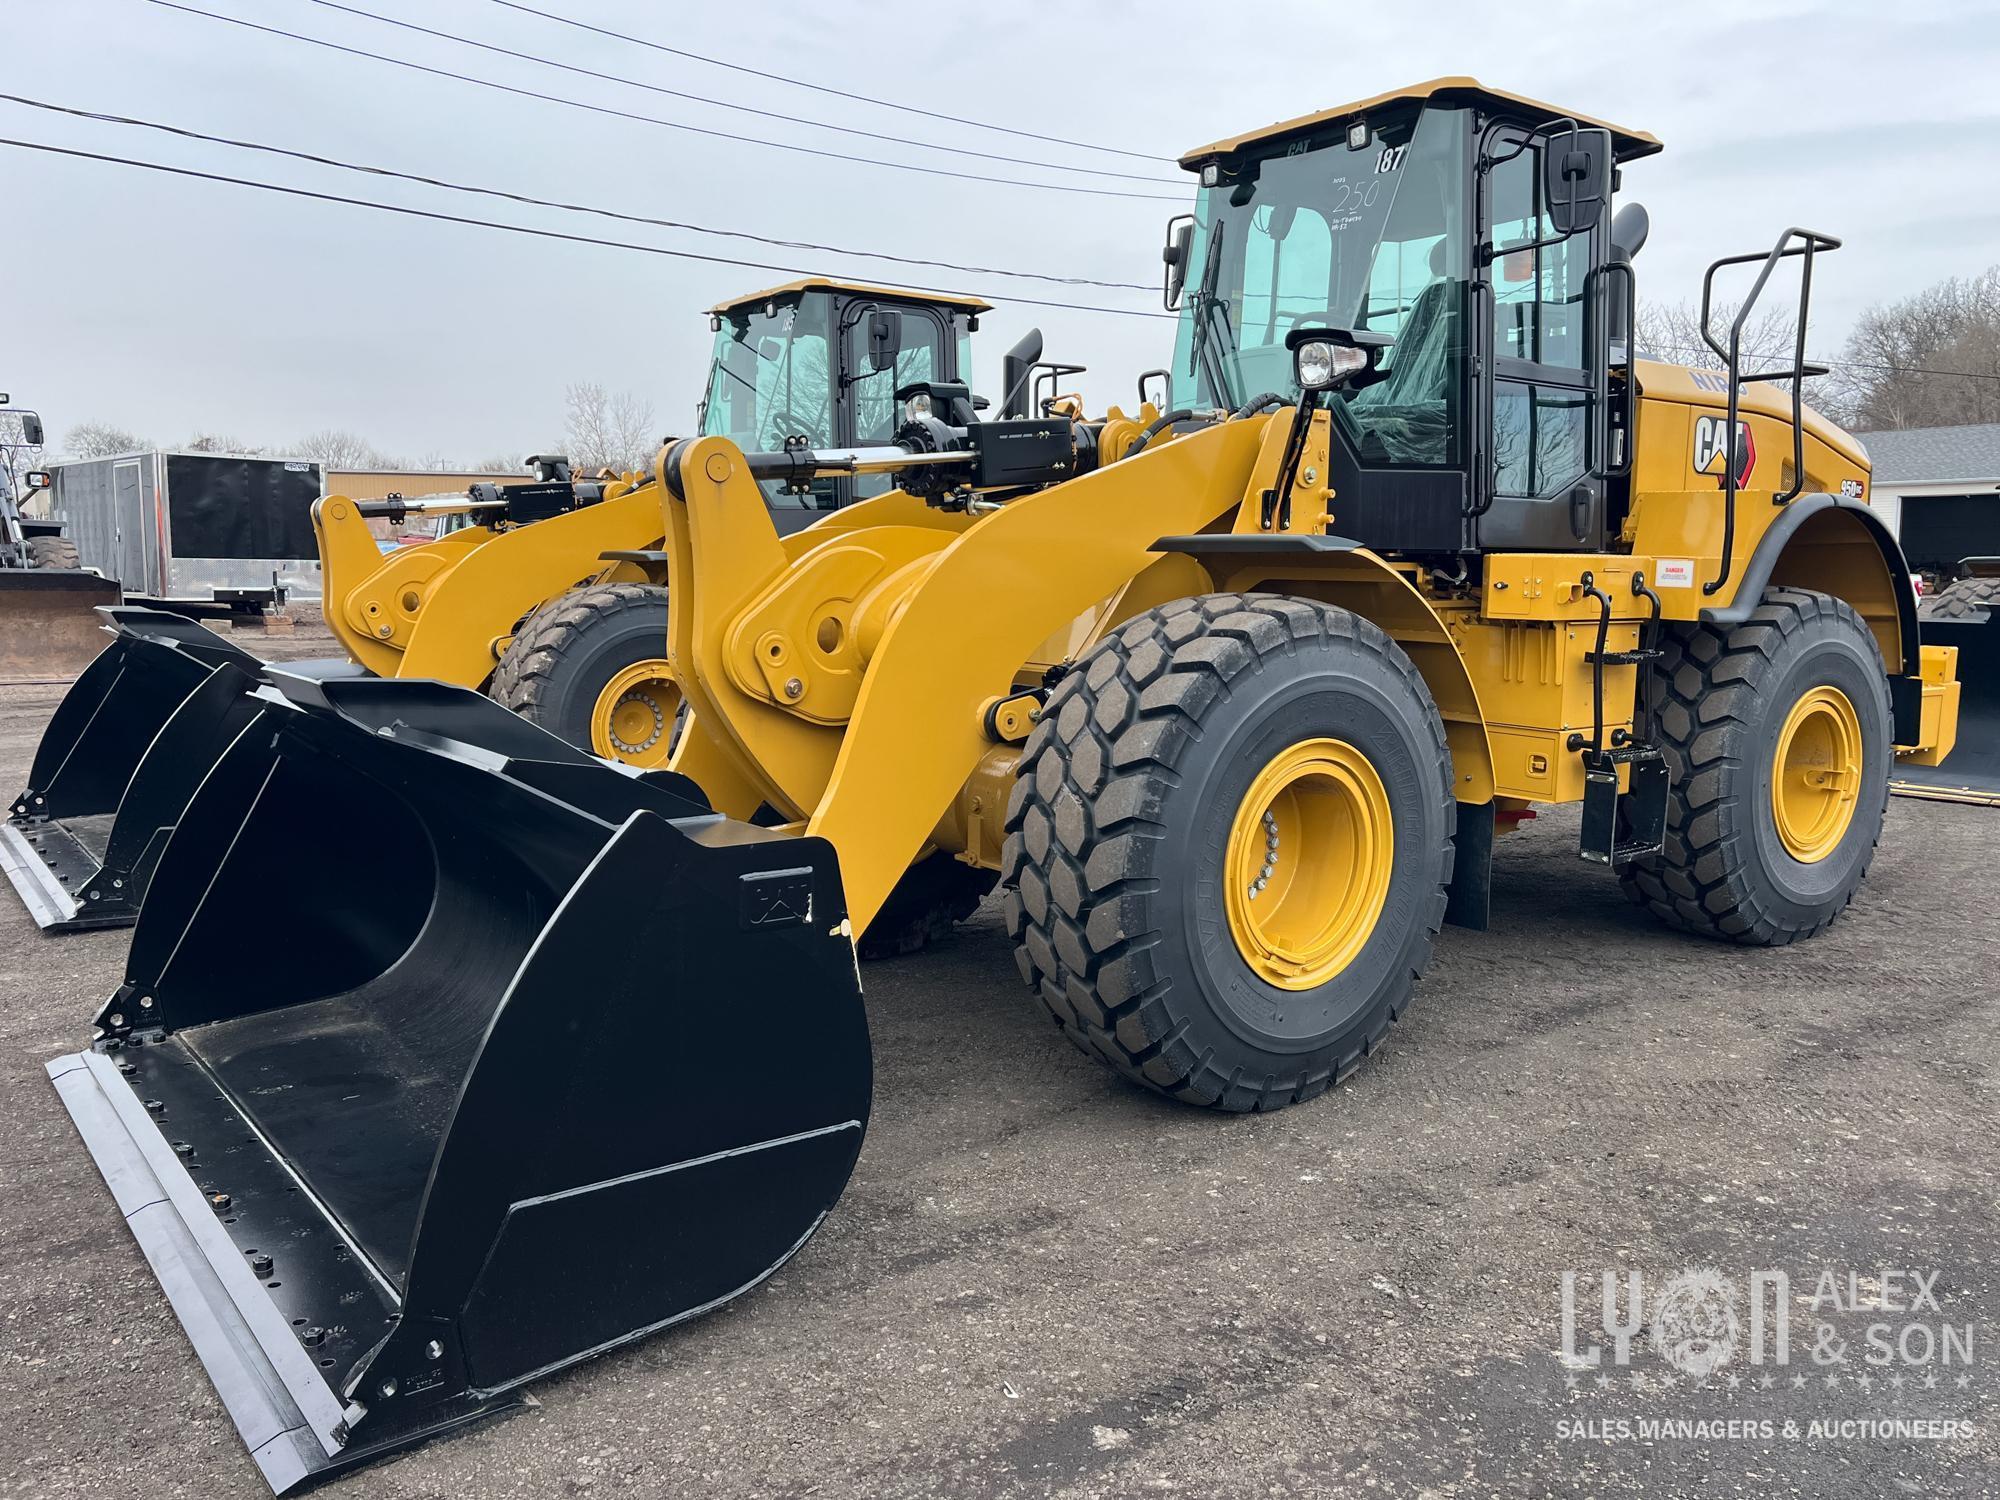 2023 CAT 950GC RUBBER TIRED LOADER... SN-06434 powered by Cat C7.1 diesel engine, 225hp, equipped wi